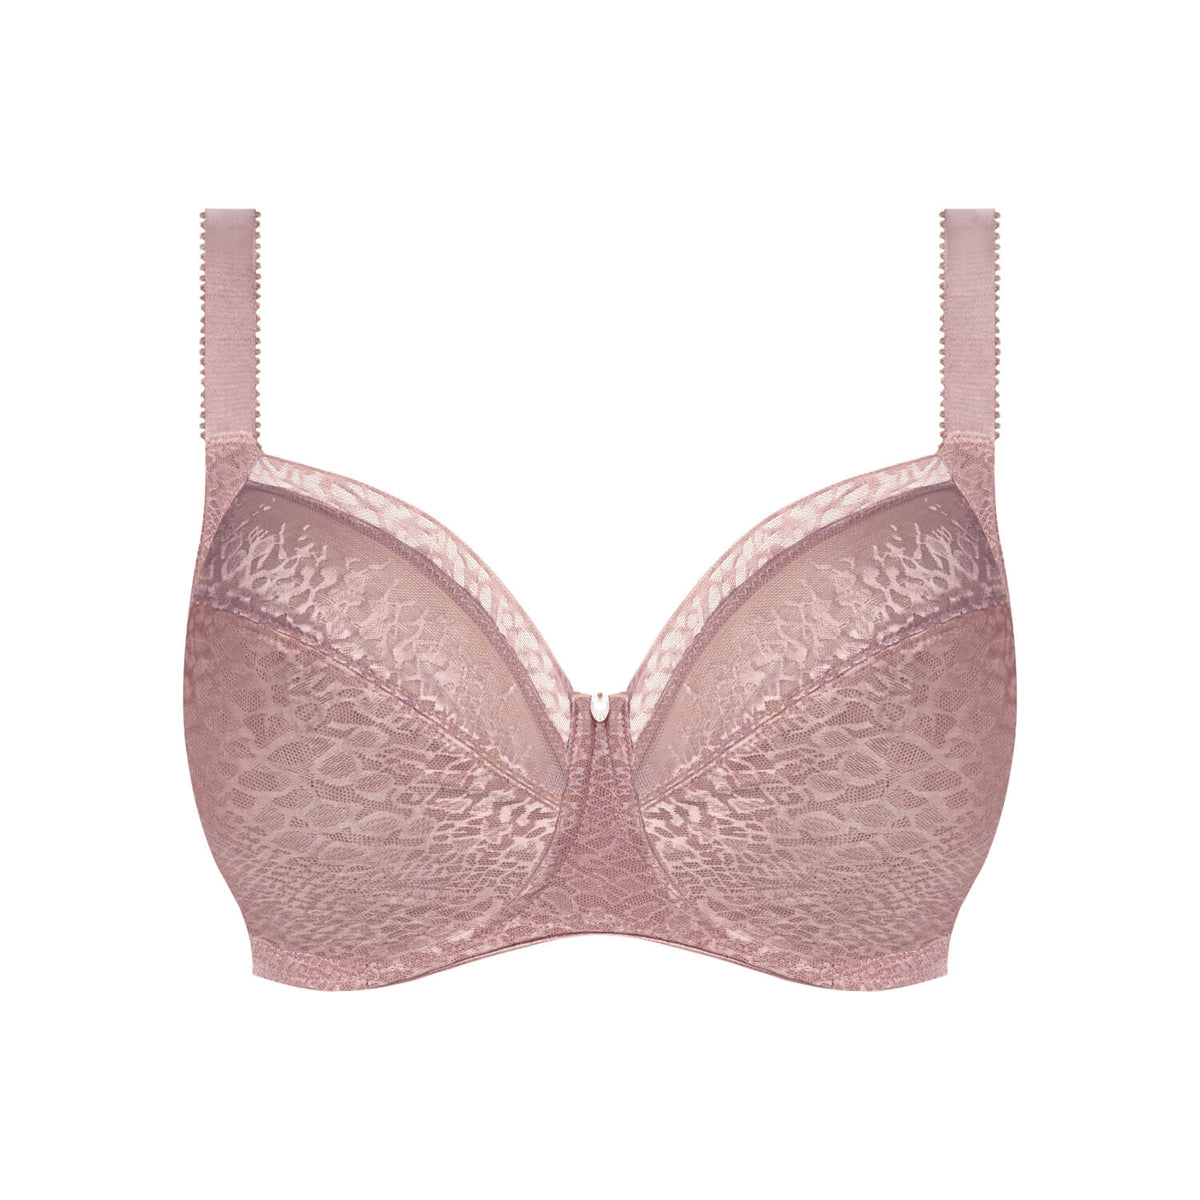 Envisage Underwire Full Cup Side Support Bra - Taupe